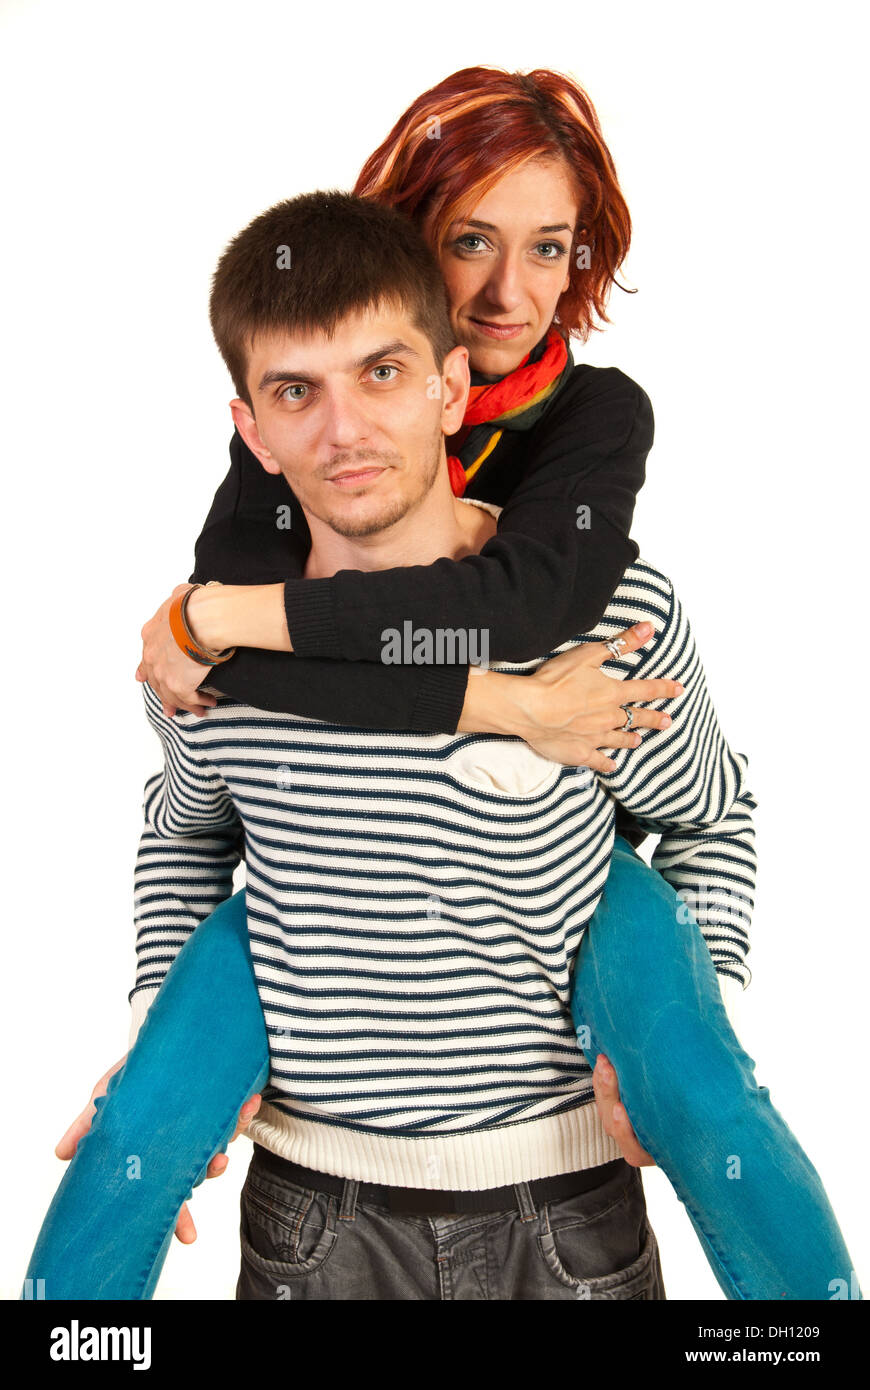 Man offering piggy back ride to woman isolated on white background Stock Photo